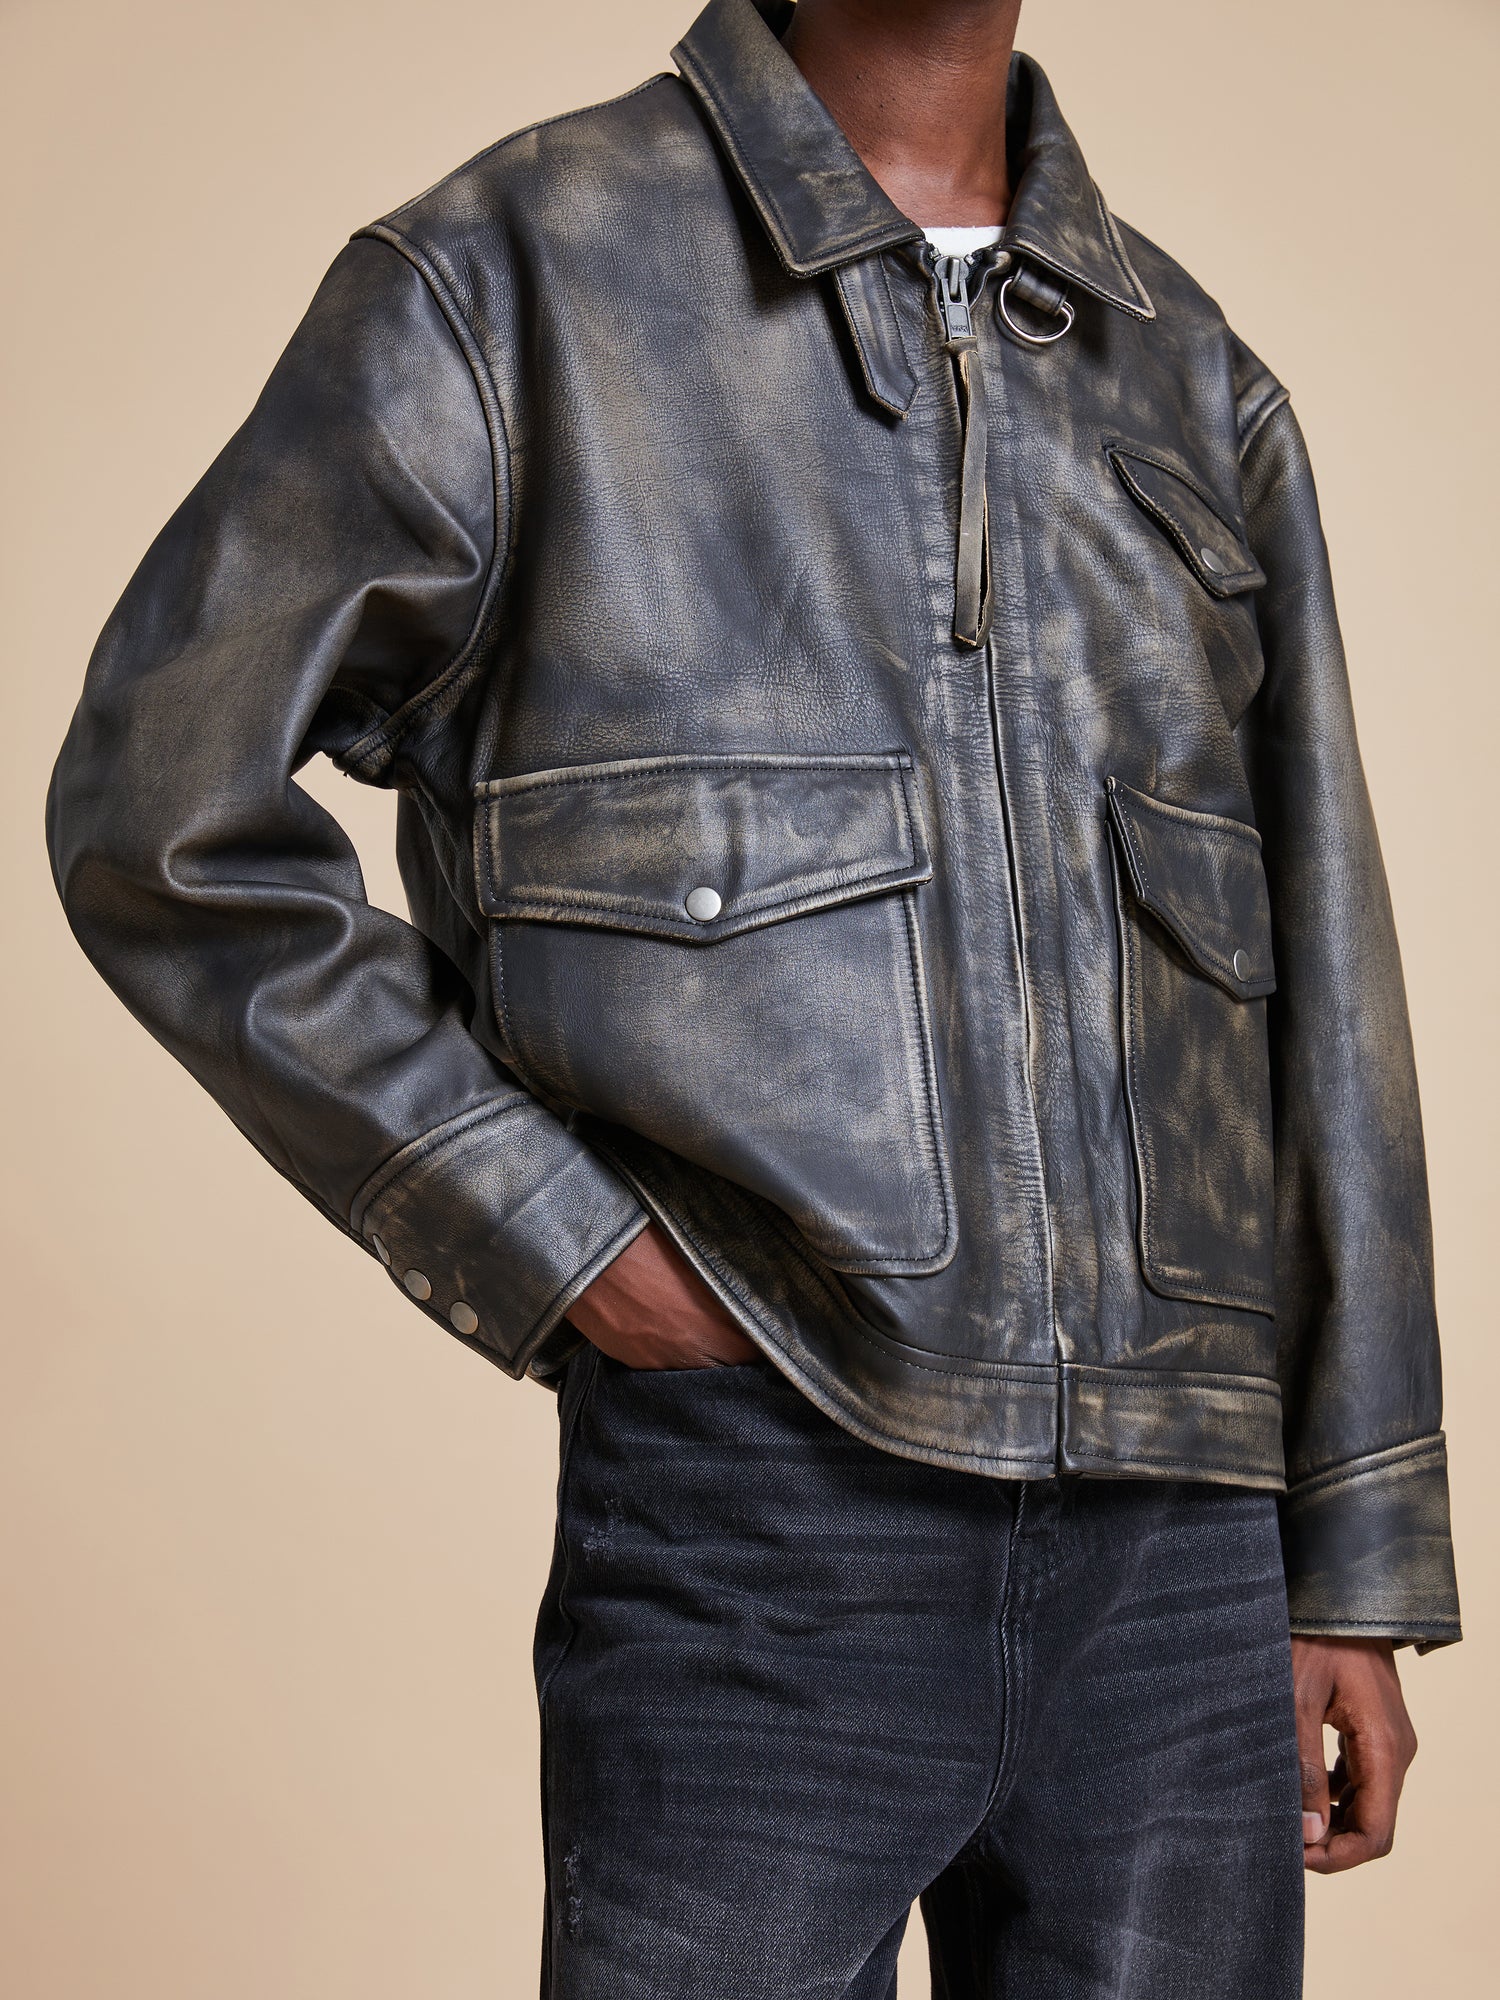 The man is wearing a Found Distressed Leather Pocket Jacket.